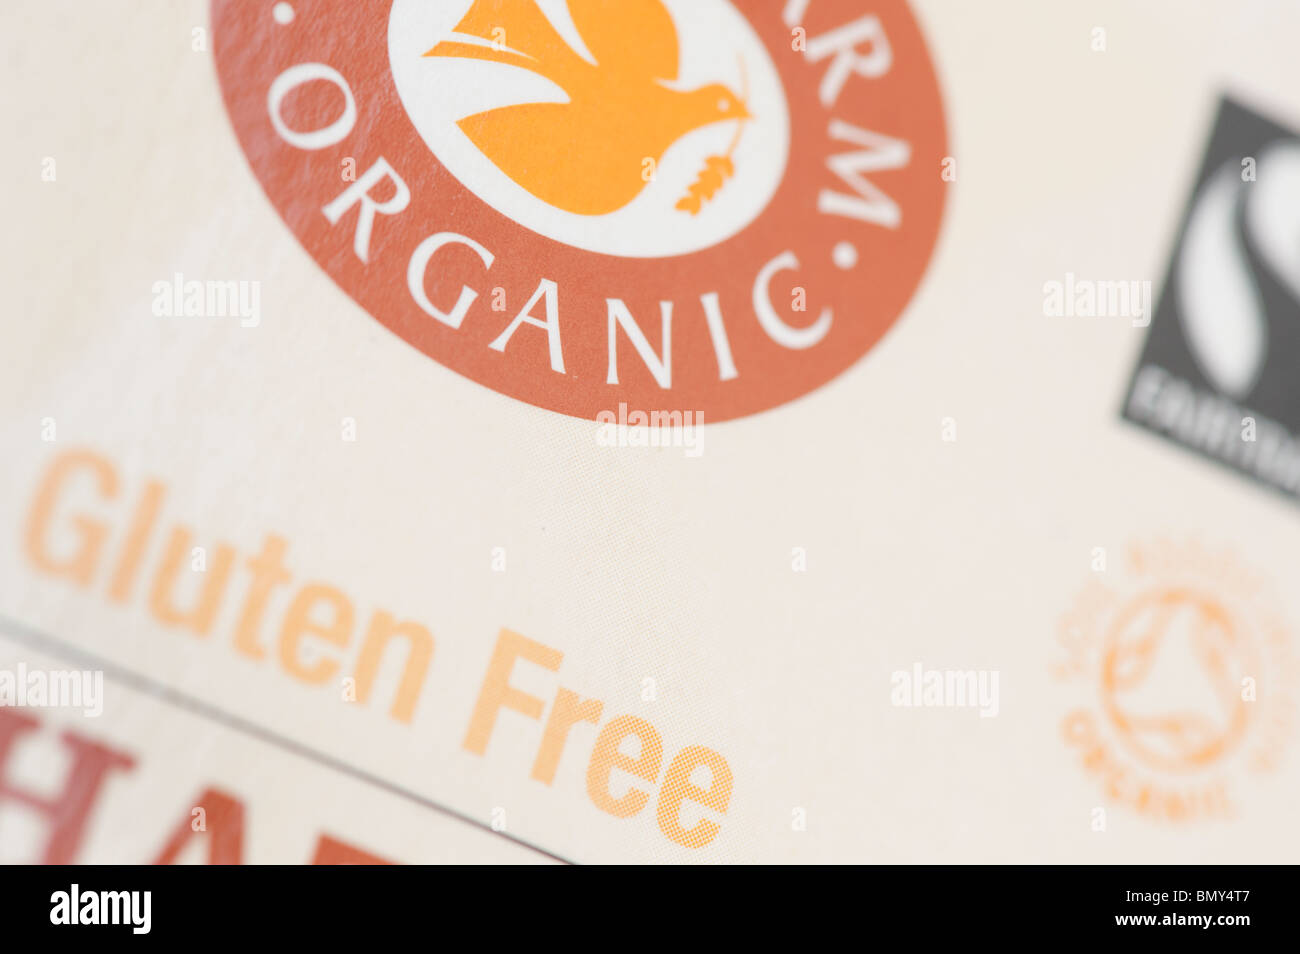 Wheat free, Gluten free, food packet labeling on organic cookies Stock Photo